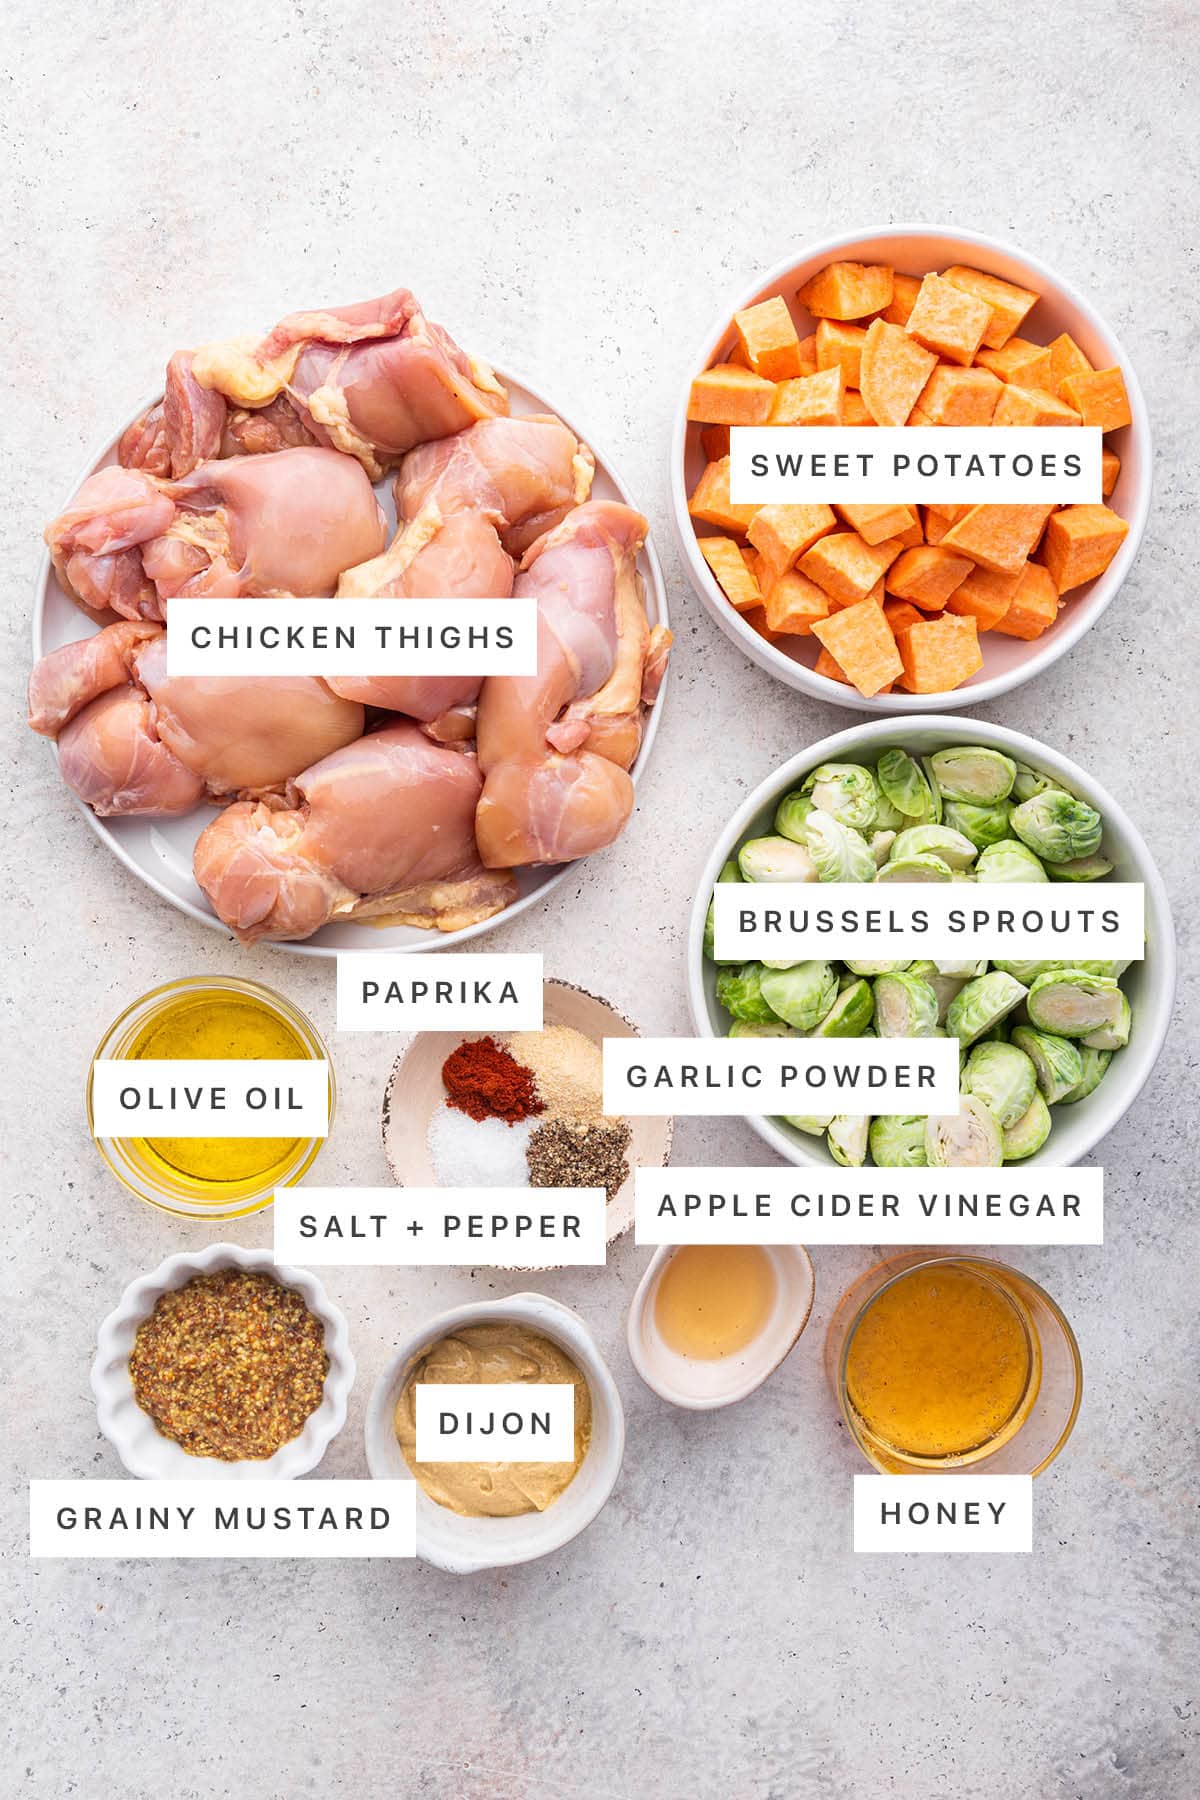 Ingredients measured out to make a Honey Mustard Chicken Sheet Pan Meal: chicken thighs, sweet potatoes, brussels sprouts, paprika, garlic powder, olive oil, salt, pepper, apple cider vinegar, grainy mustard, dijon and honey.